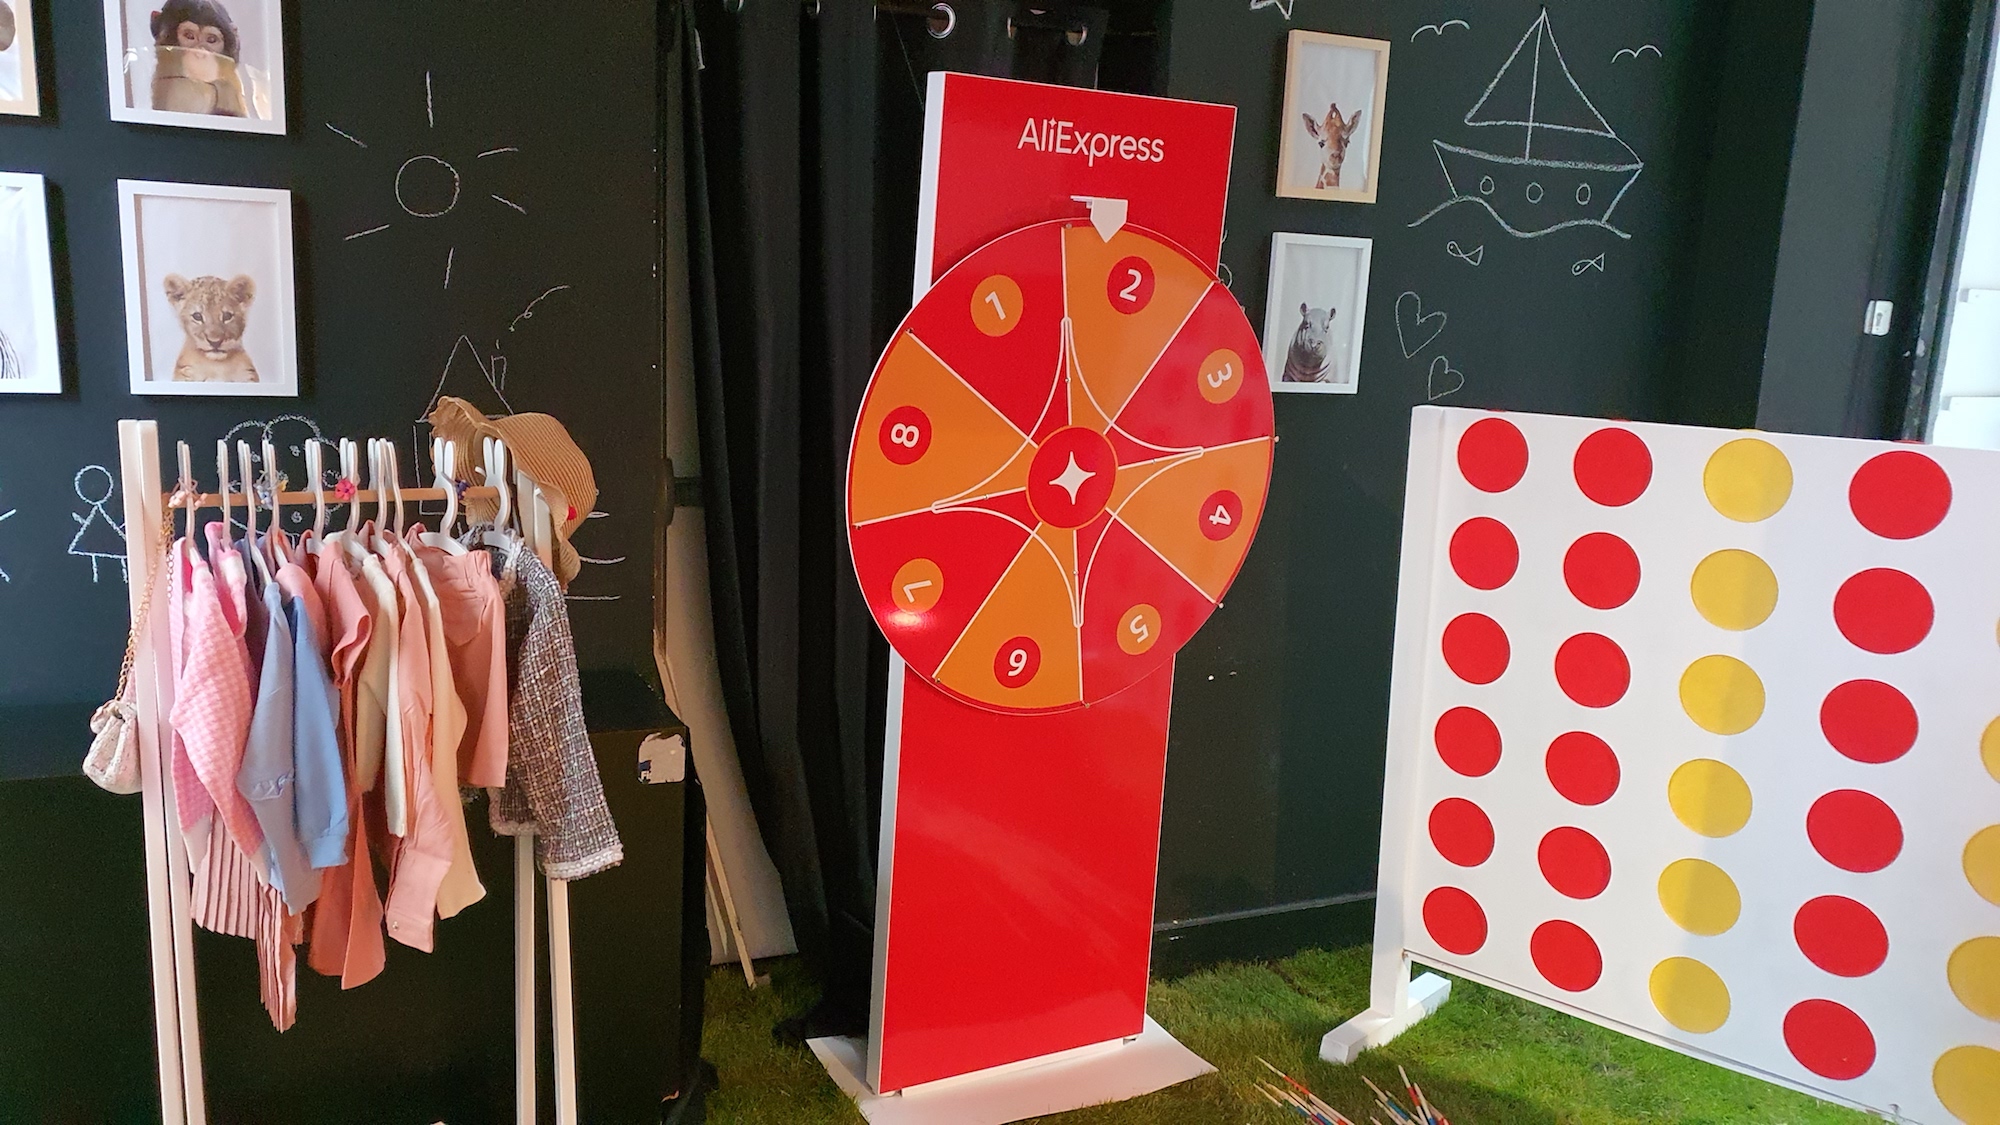 A look at the technology behind the AliExpress Pop-up Store - Altavia  Shoppermind